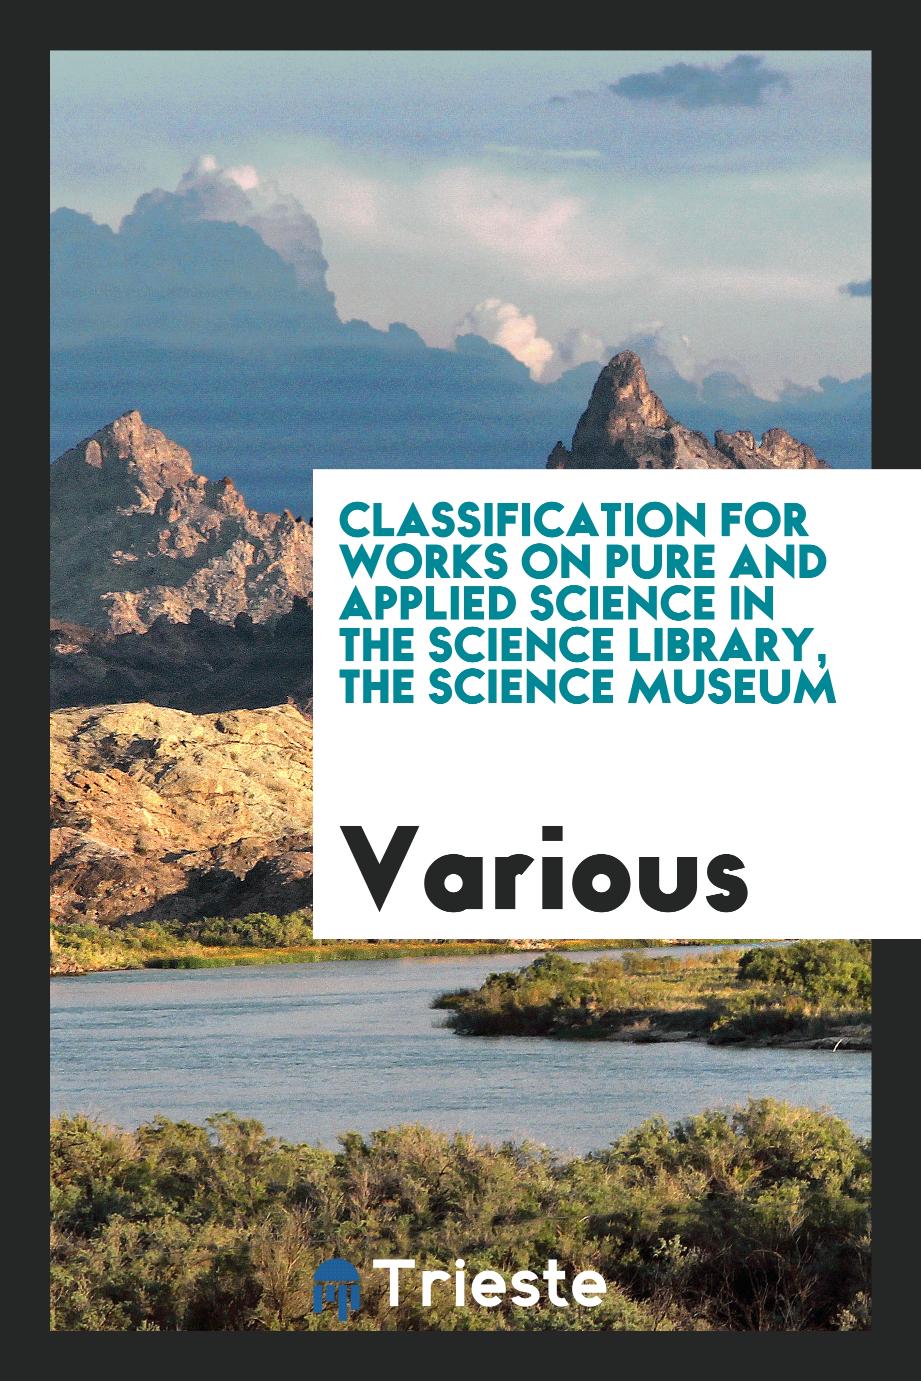 Classification for works on pure and applied science in the Science Library, the Science Museum